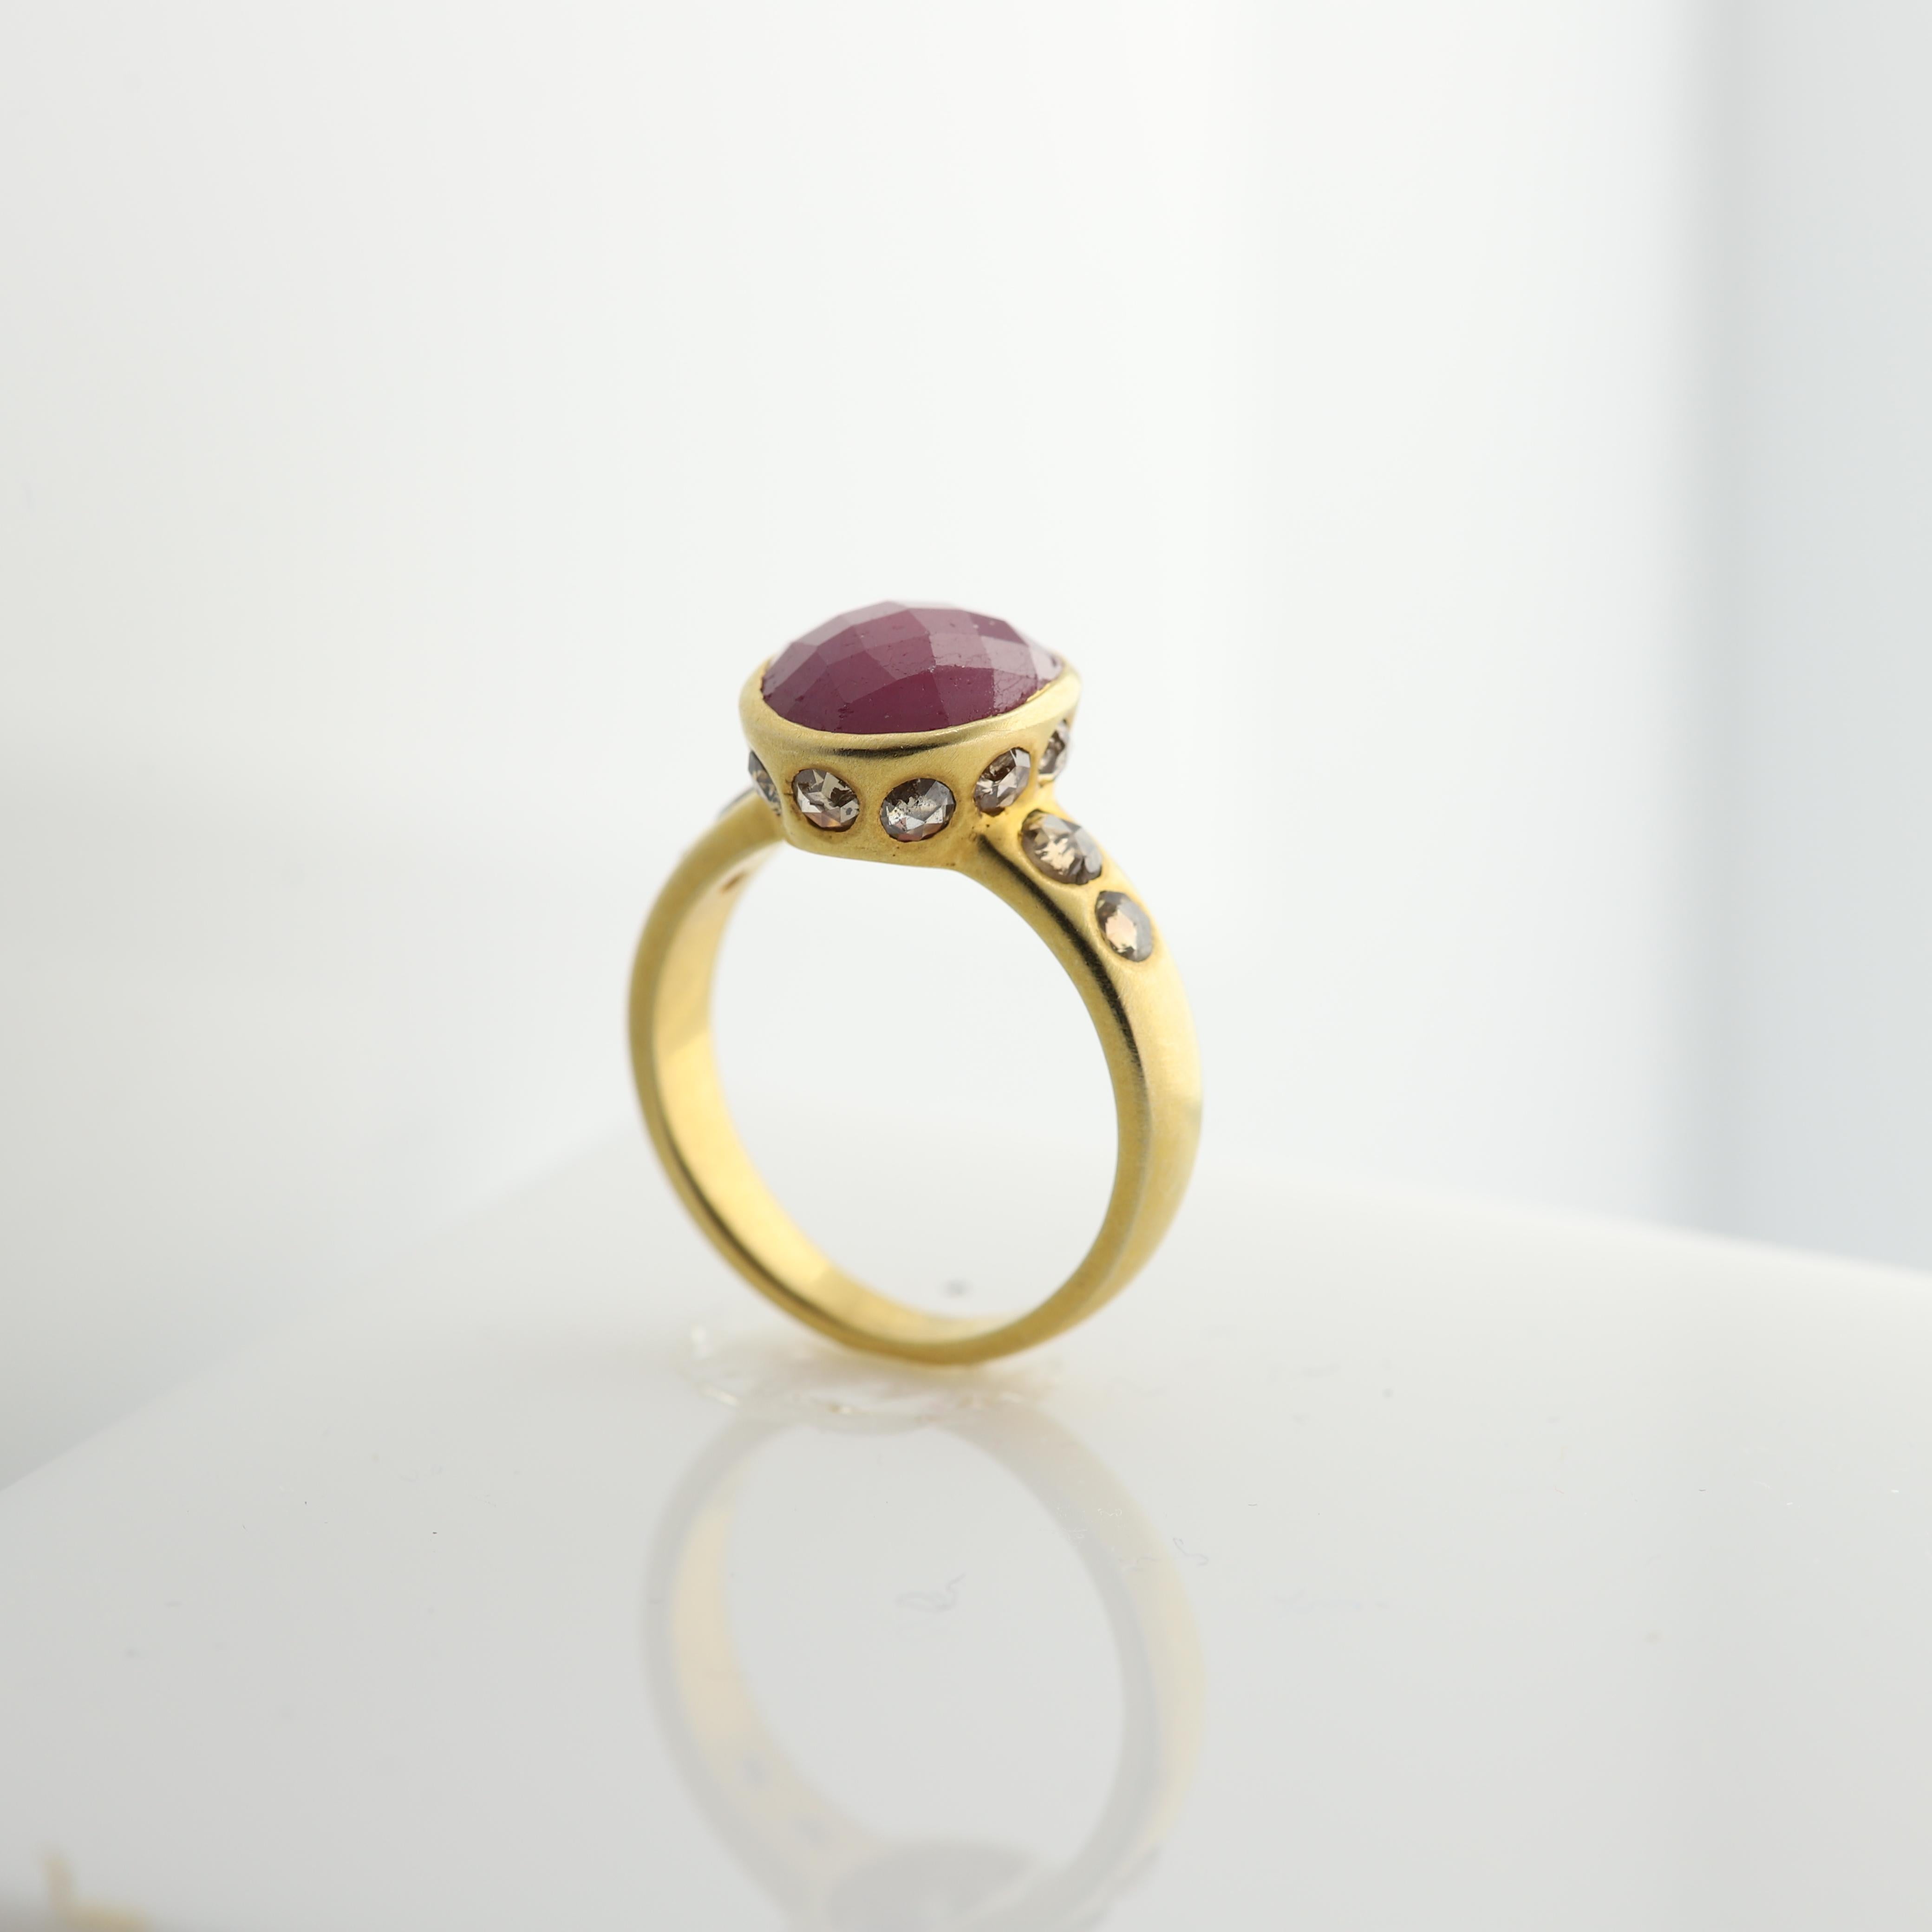 4.0 Ct Ruby Vintage Ring 18k Yellow Gold Oval Ruby & Old Cut Diamonds Ring For Sale 4